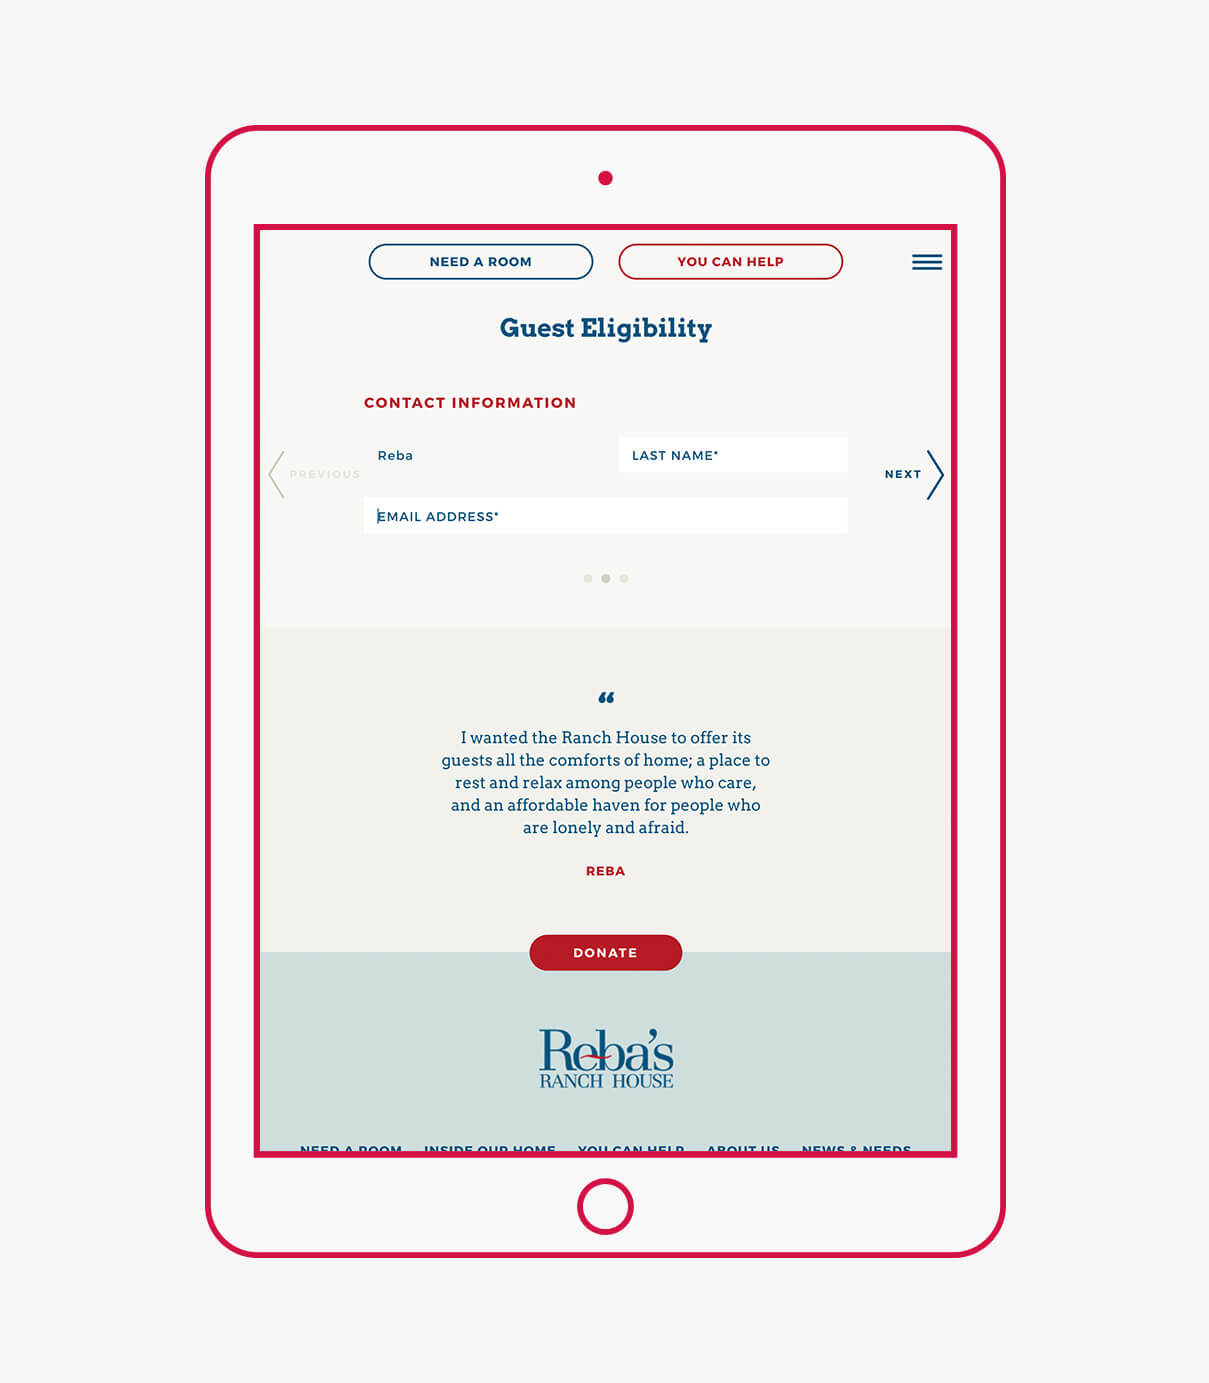 Website design featuring guest eligibility form and quote on tablet for Rebas Ranch House, a charity organization in Denison, Texas